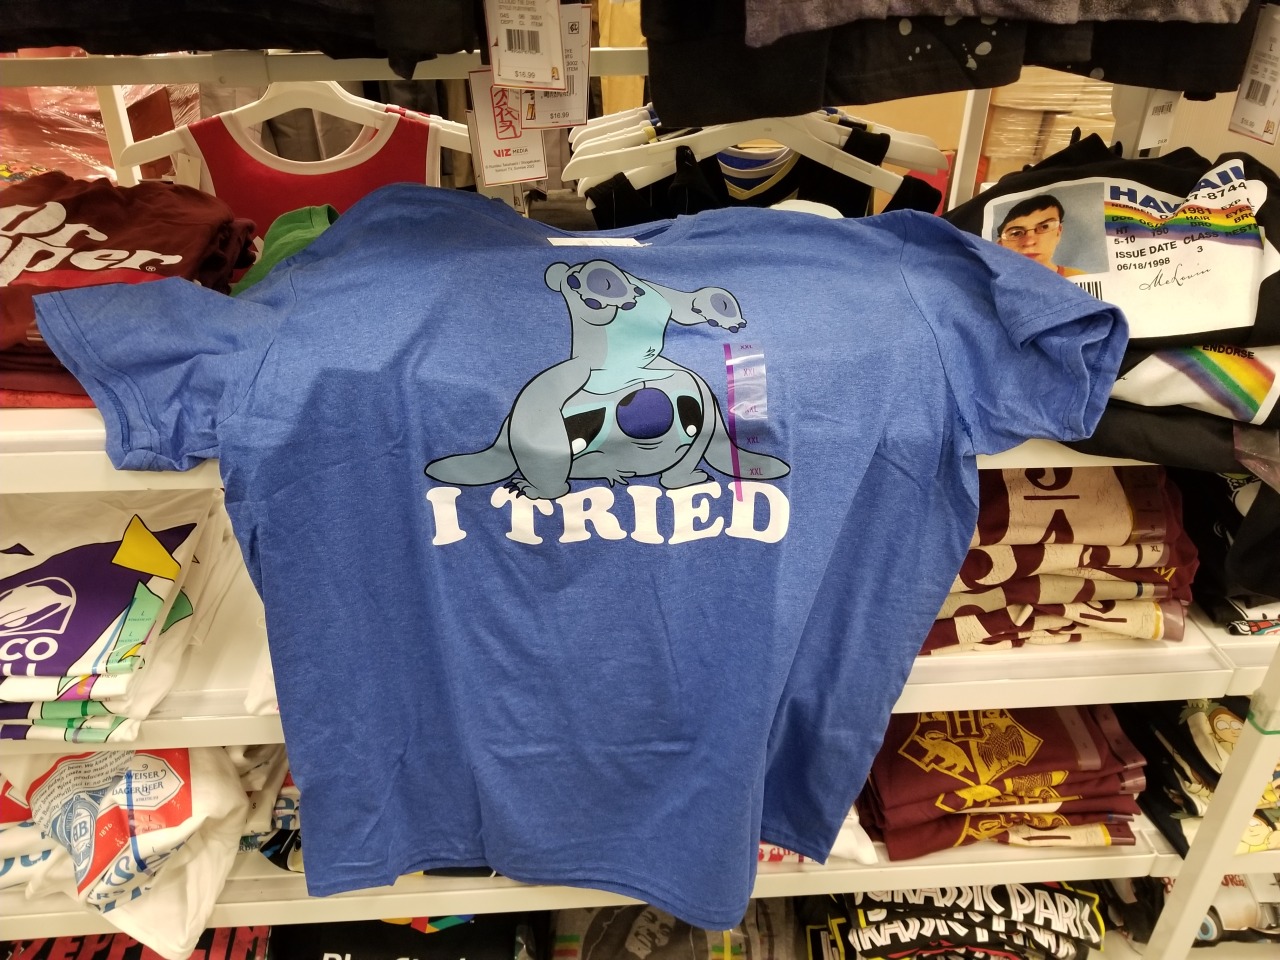 ABlueStitchInTime — One of the most overused saying on Stitch merch….